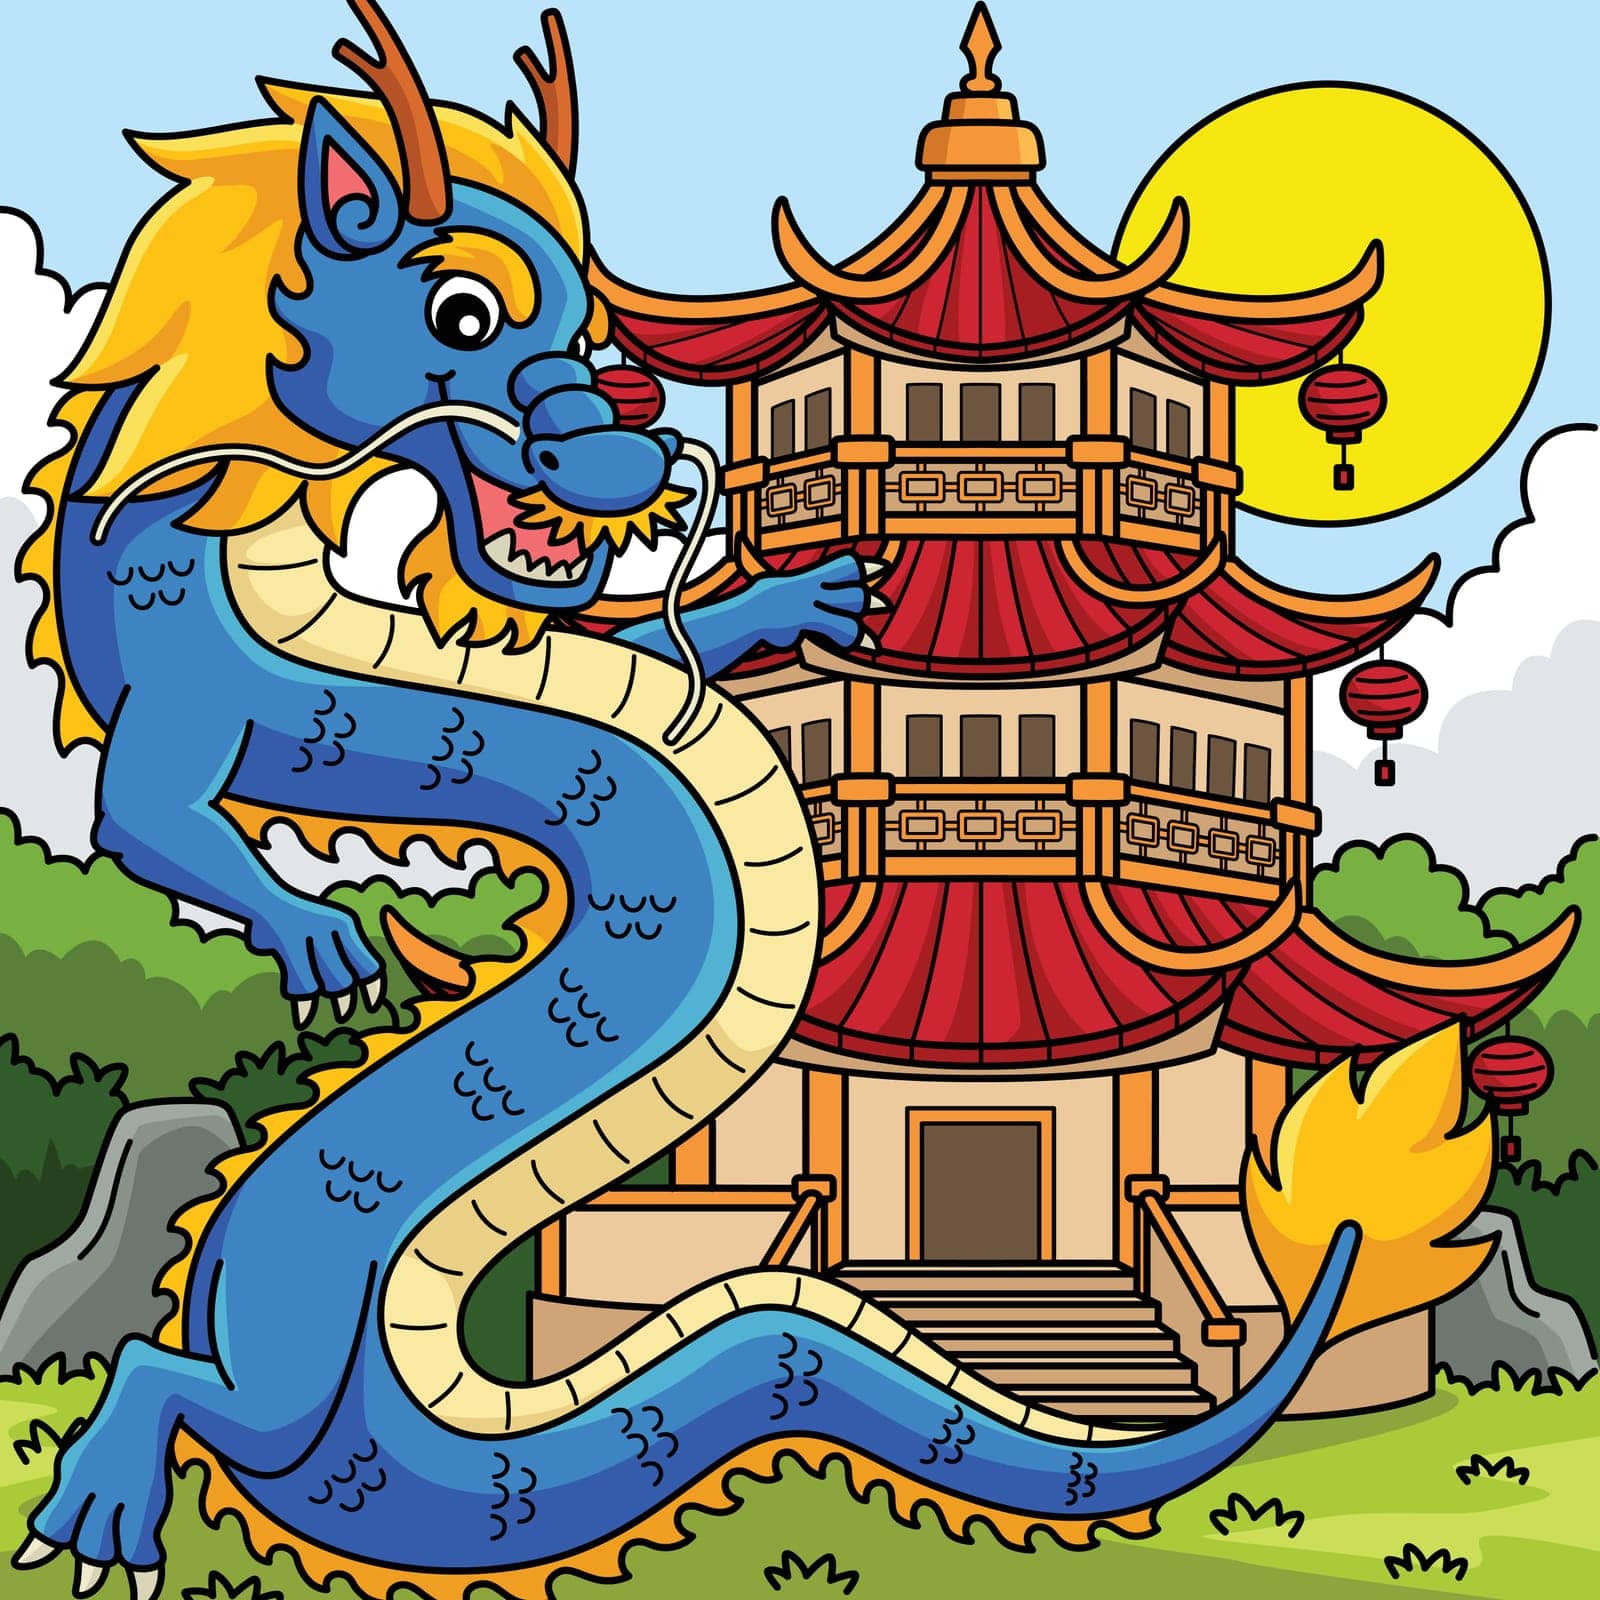 This cartoon clipart shows a Year of the Dragon with a Pagoda illustration.